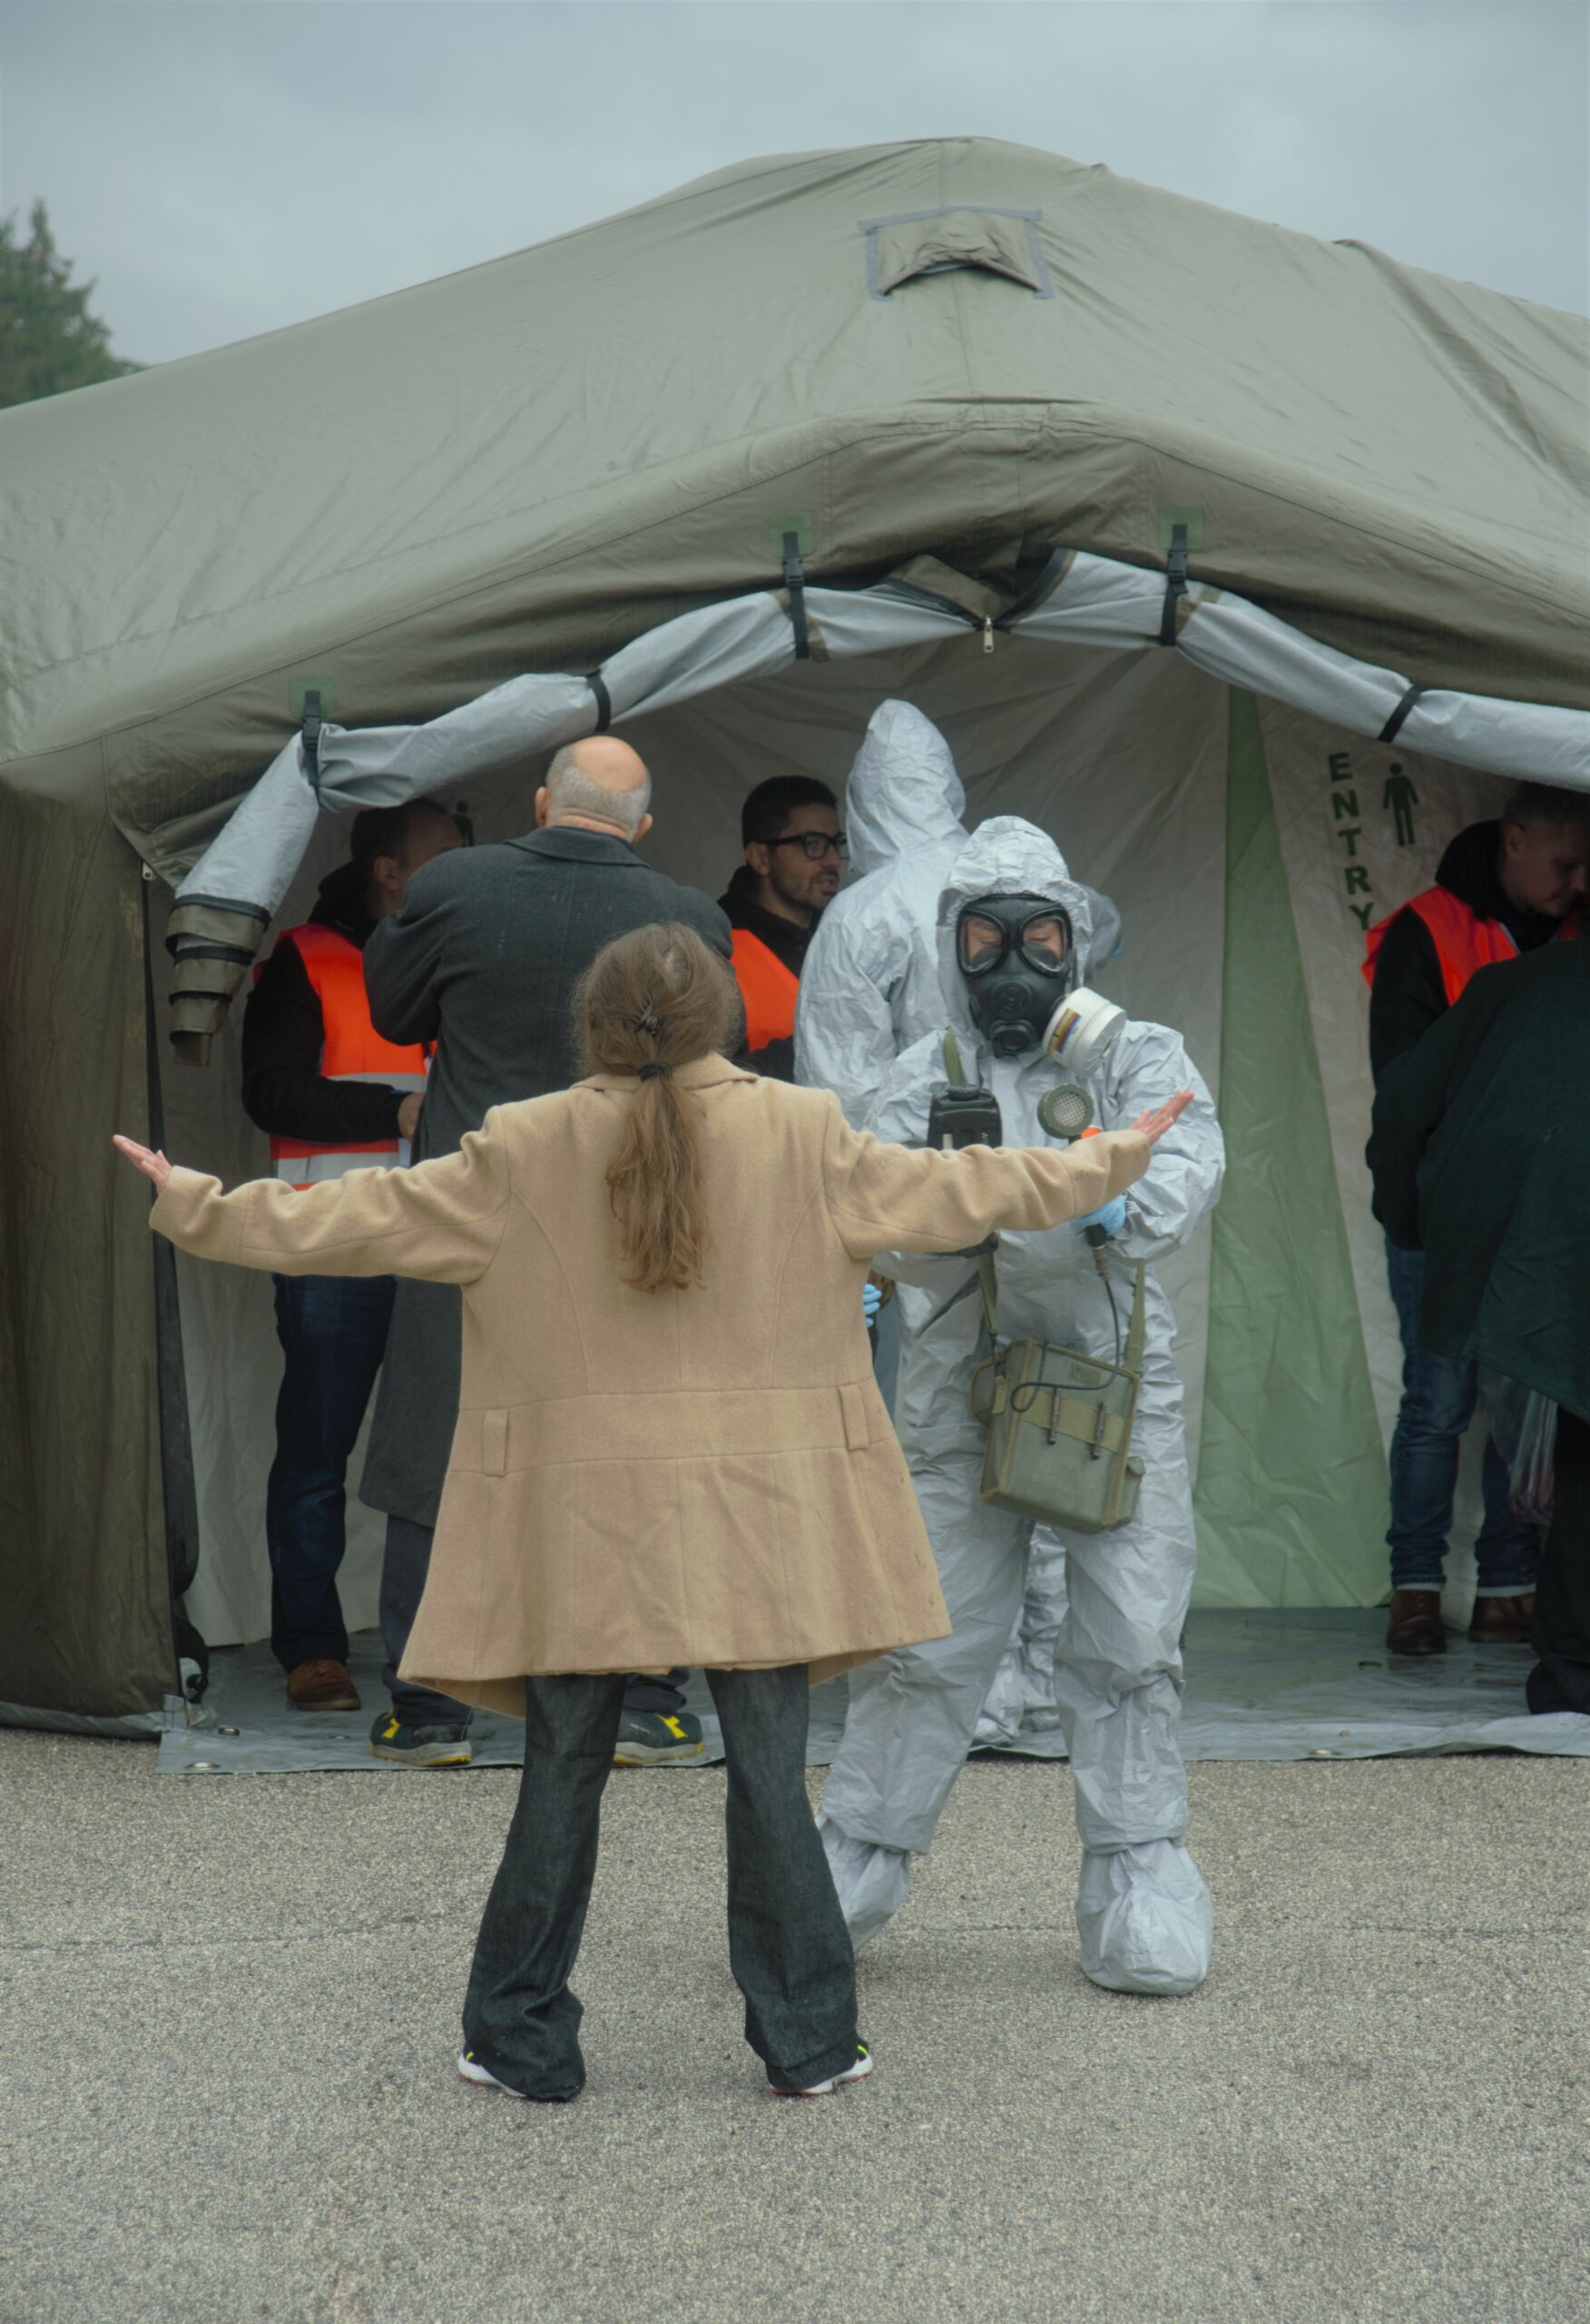 A person in a gray hazmat suit with a detector on his hand is checking hands of a woman participant, who is standing like a starfish (arms and legs spread). Behind them, the decontamination tent can be seen. Another participant is about to walk through the tent, guided by another persons in a grey hazmat suit.